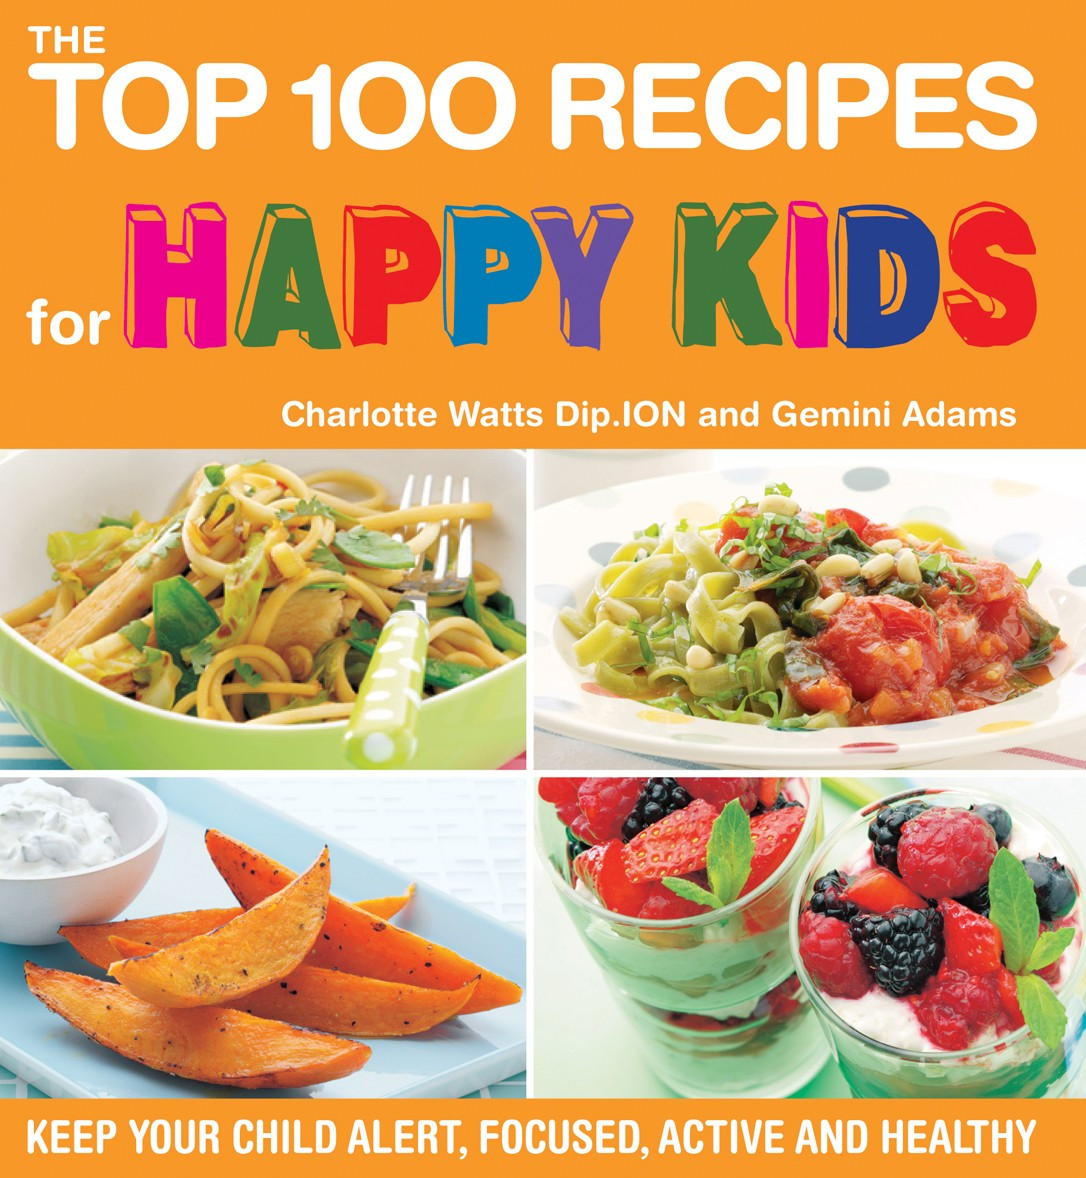 Recipes For Children
 The Top 100 Recipes for Happy Kids Healthy Food